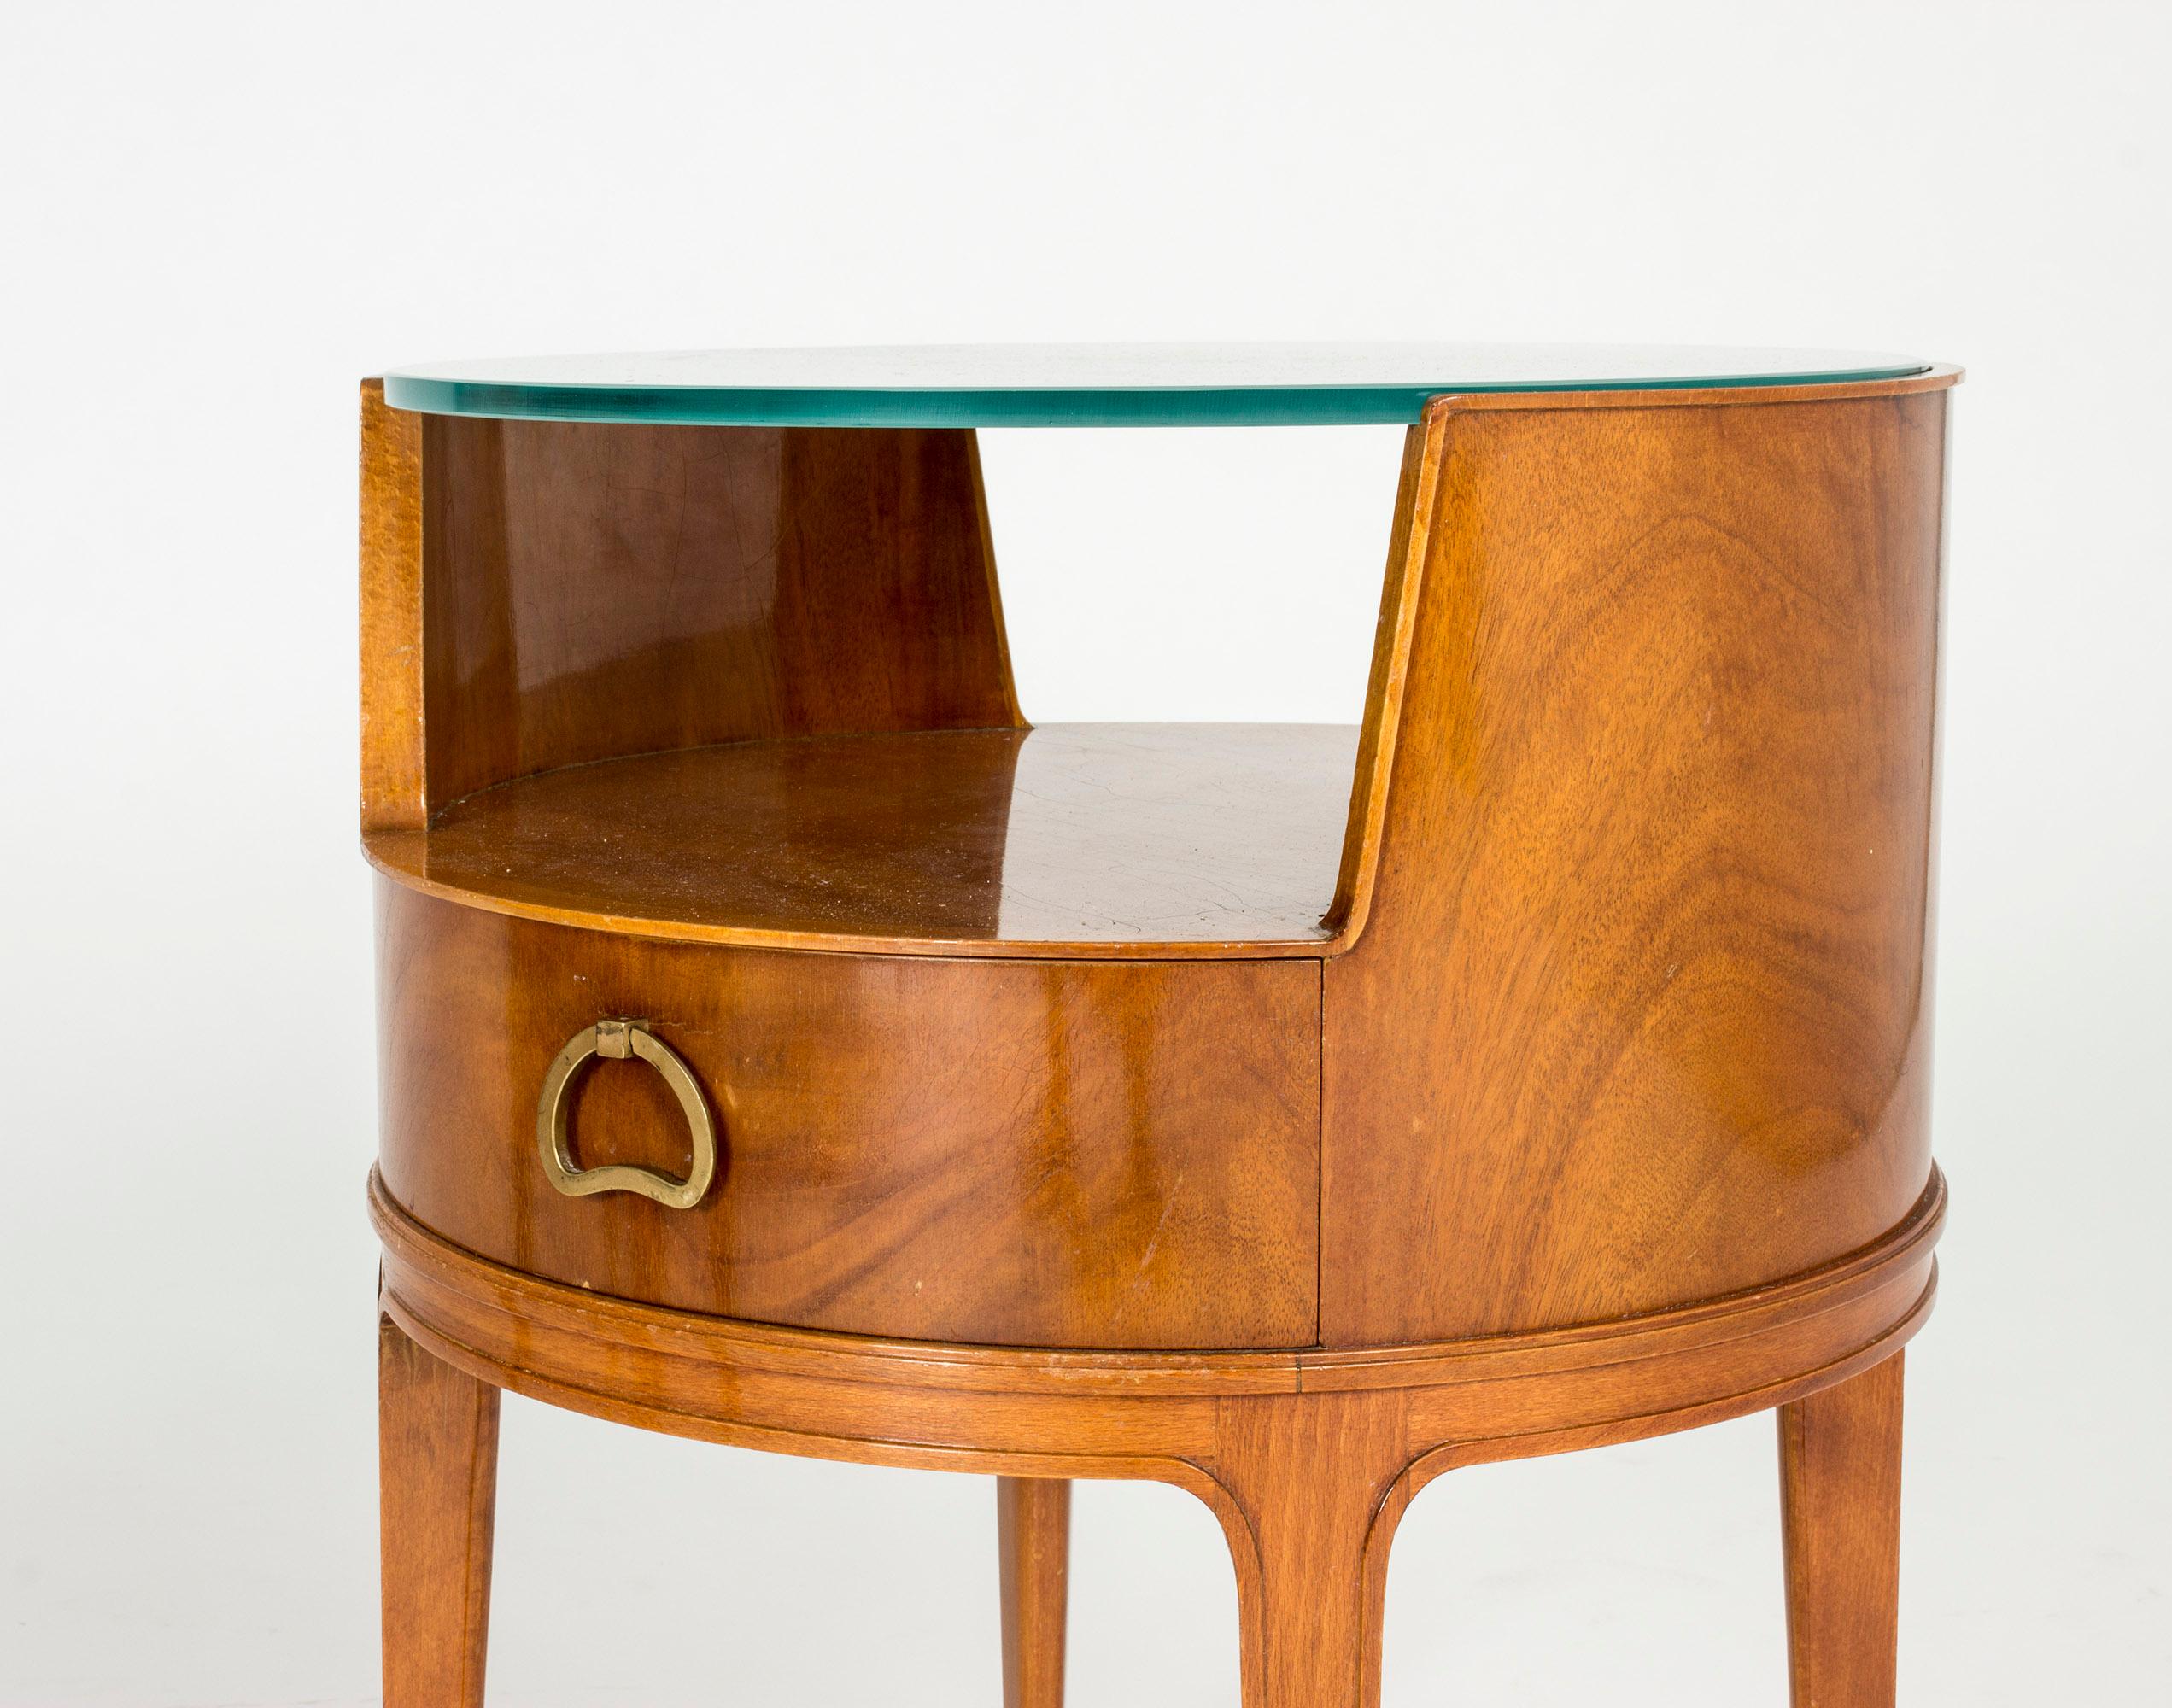 Pair of Mahogany Side Tables by Axel Larsson 1